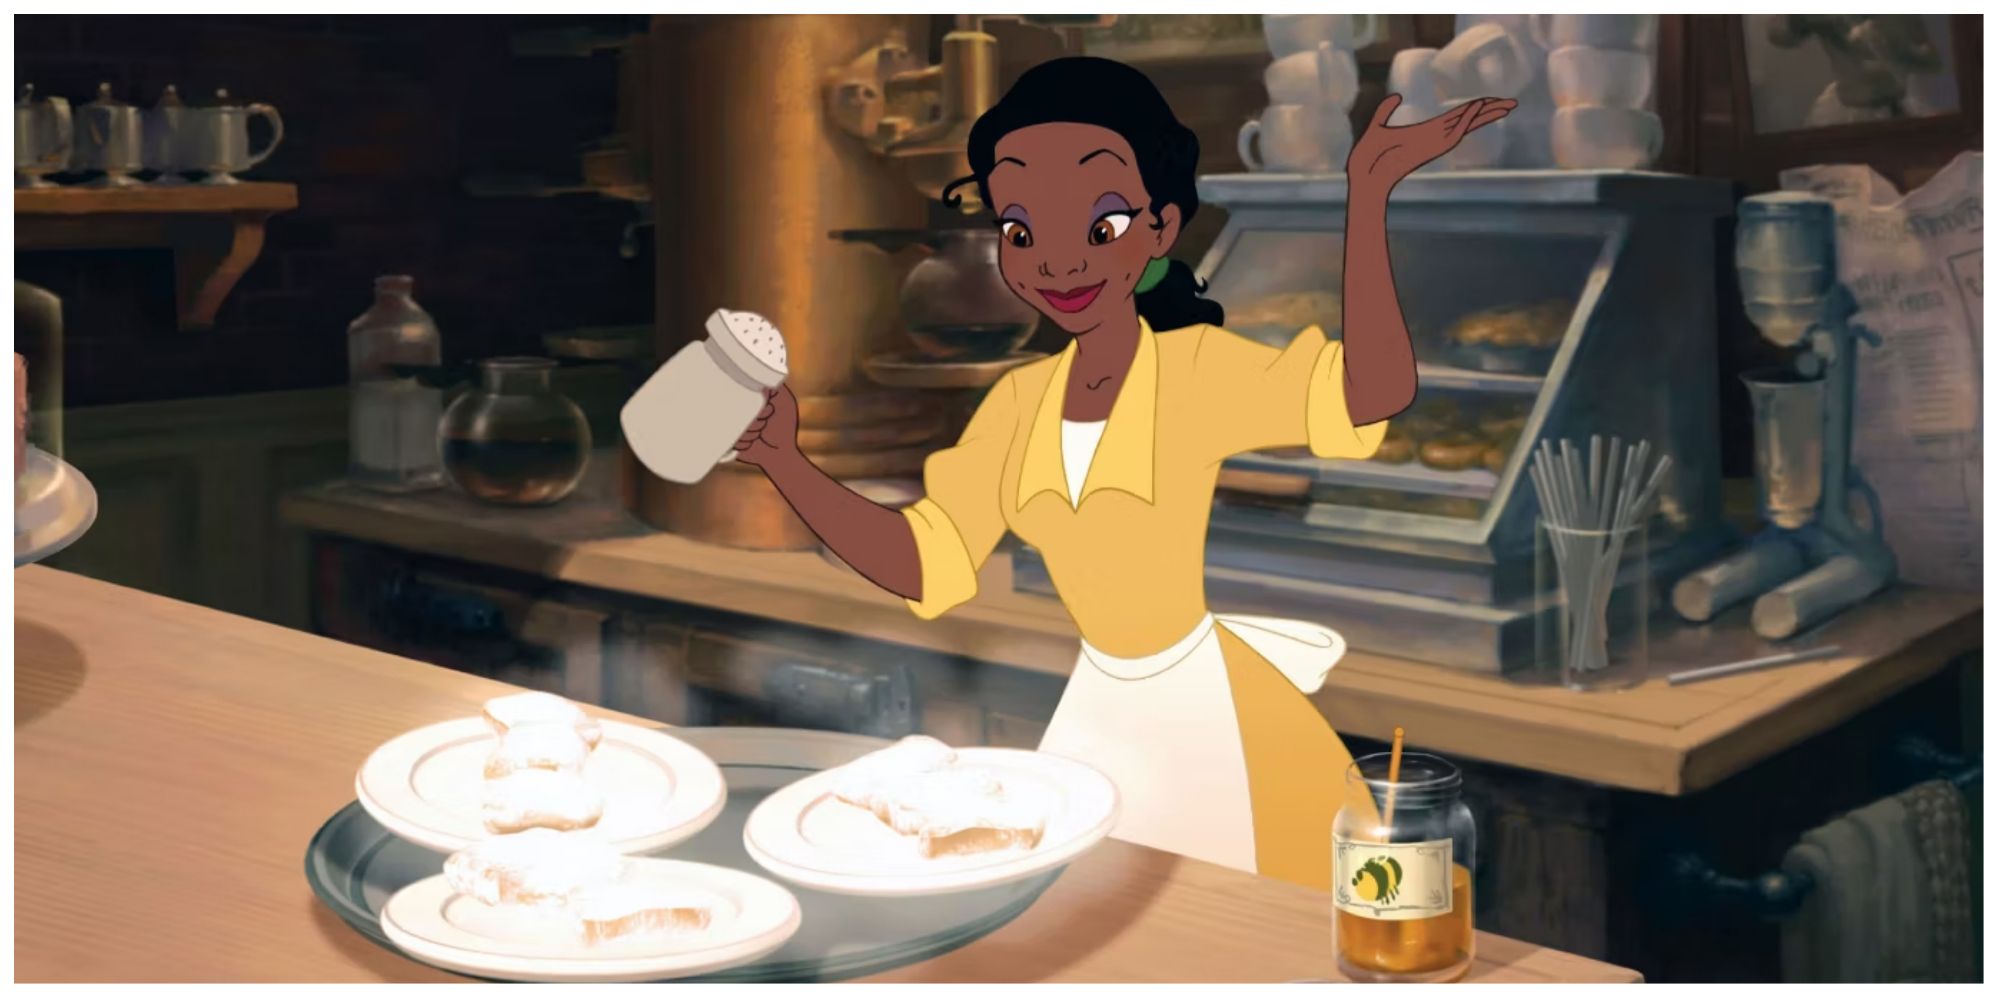 Tiana in the Princess and the Frog